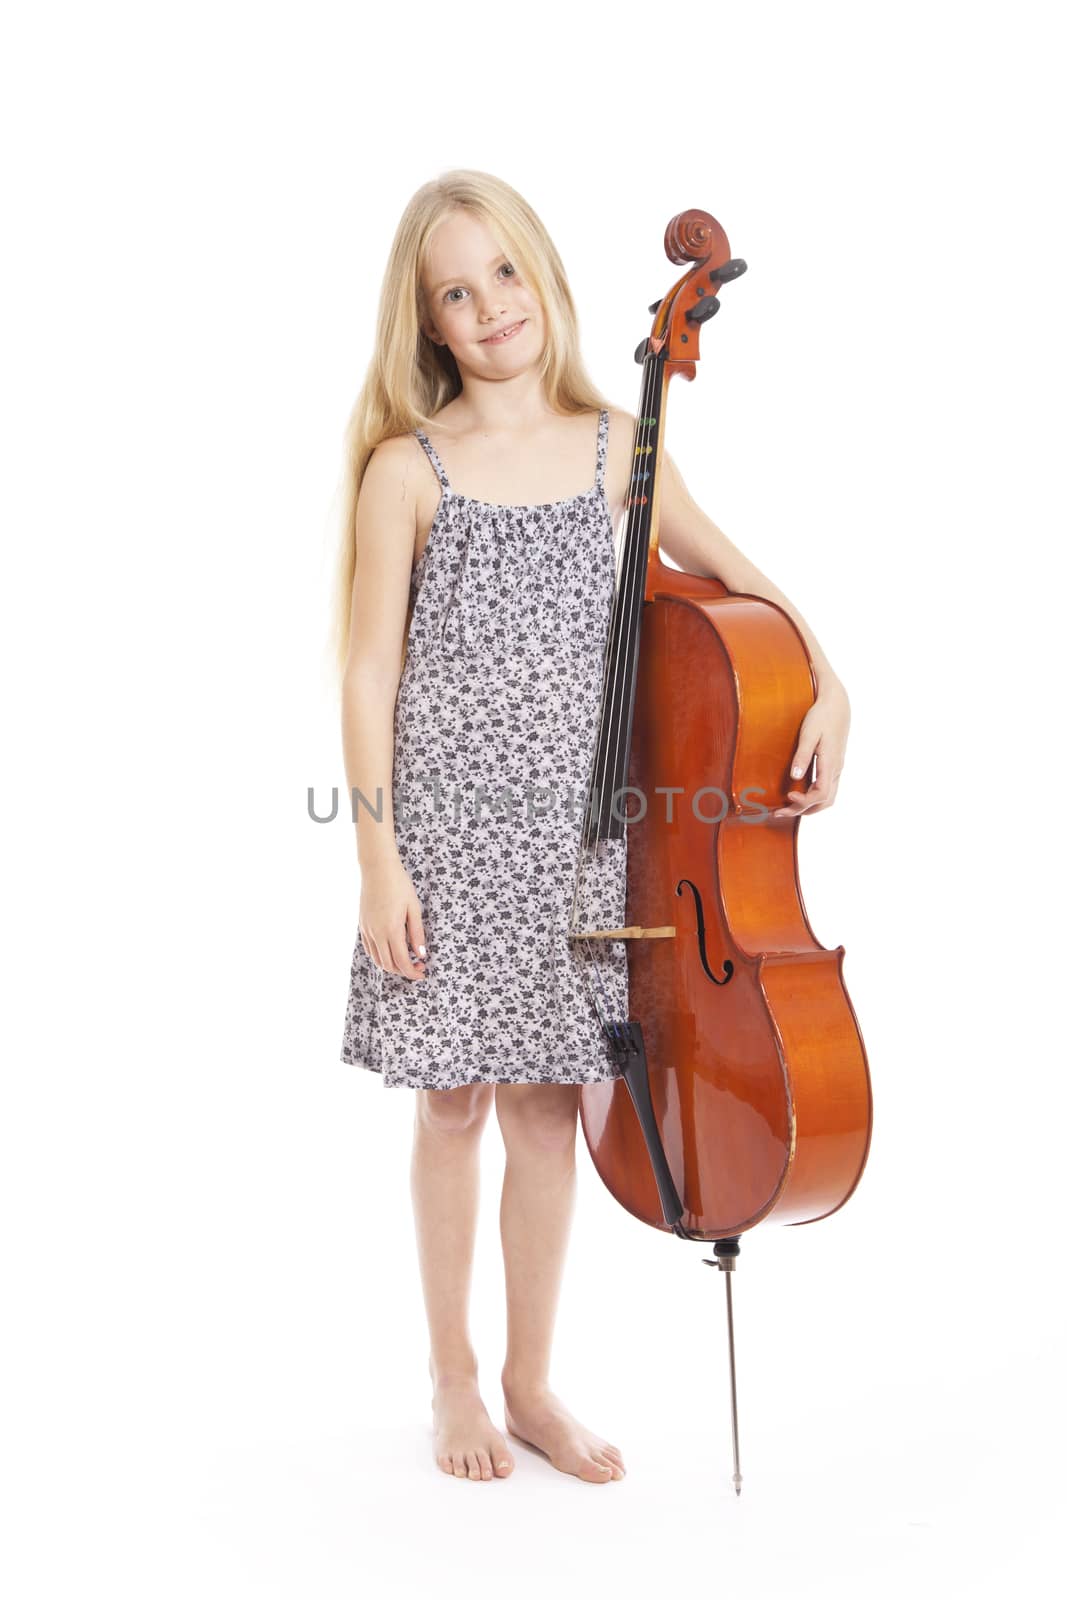 young girl in dress and her cello by ahavelaar